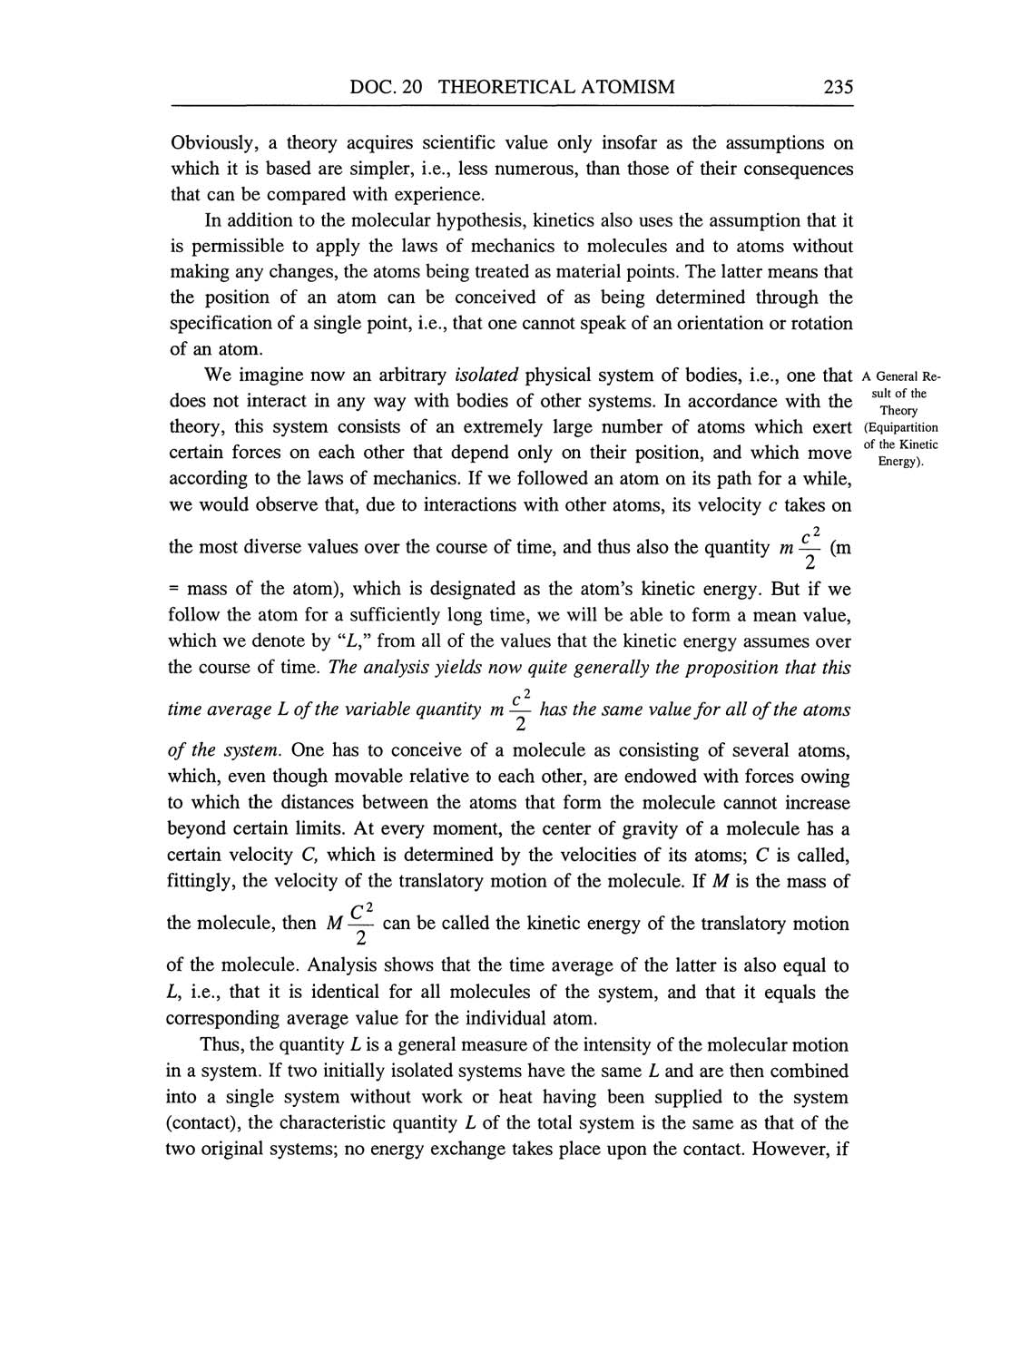 Volume 4: The Swiss Years: Writings 1912-1914 (English translation supplement) page 235